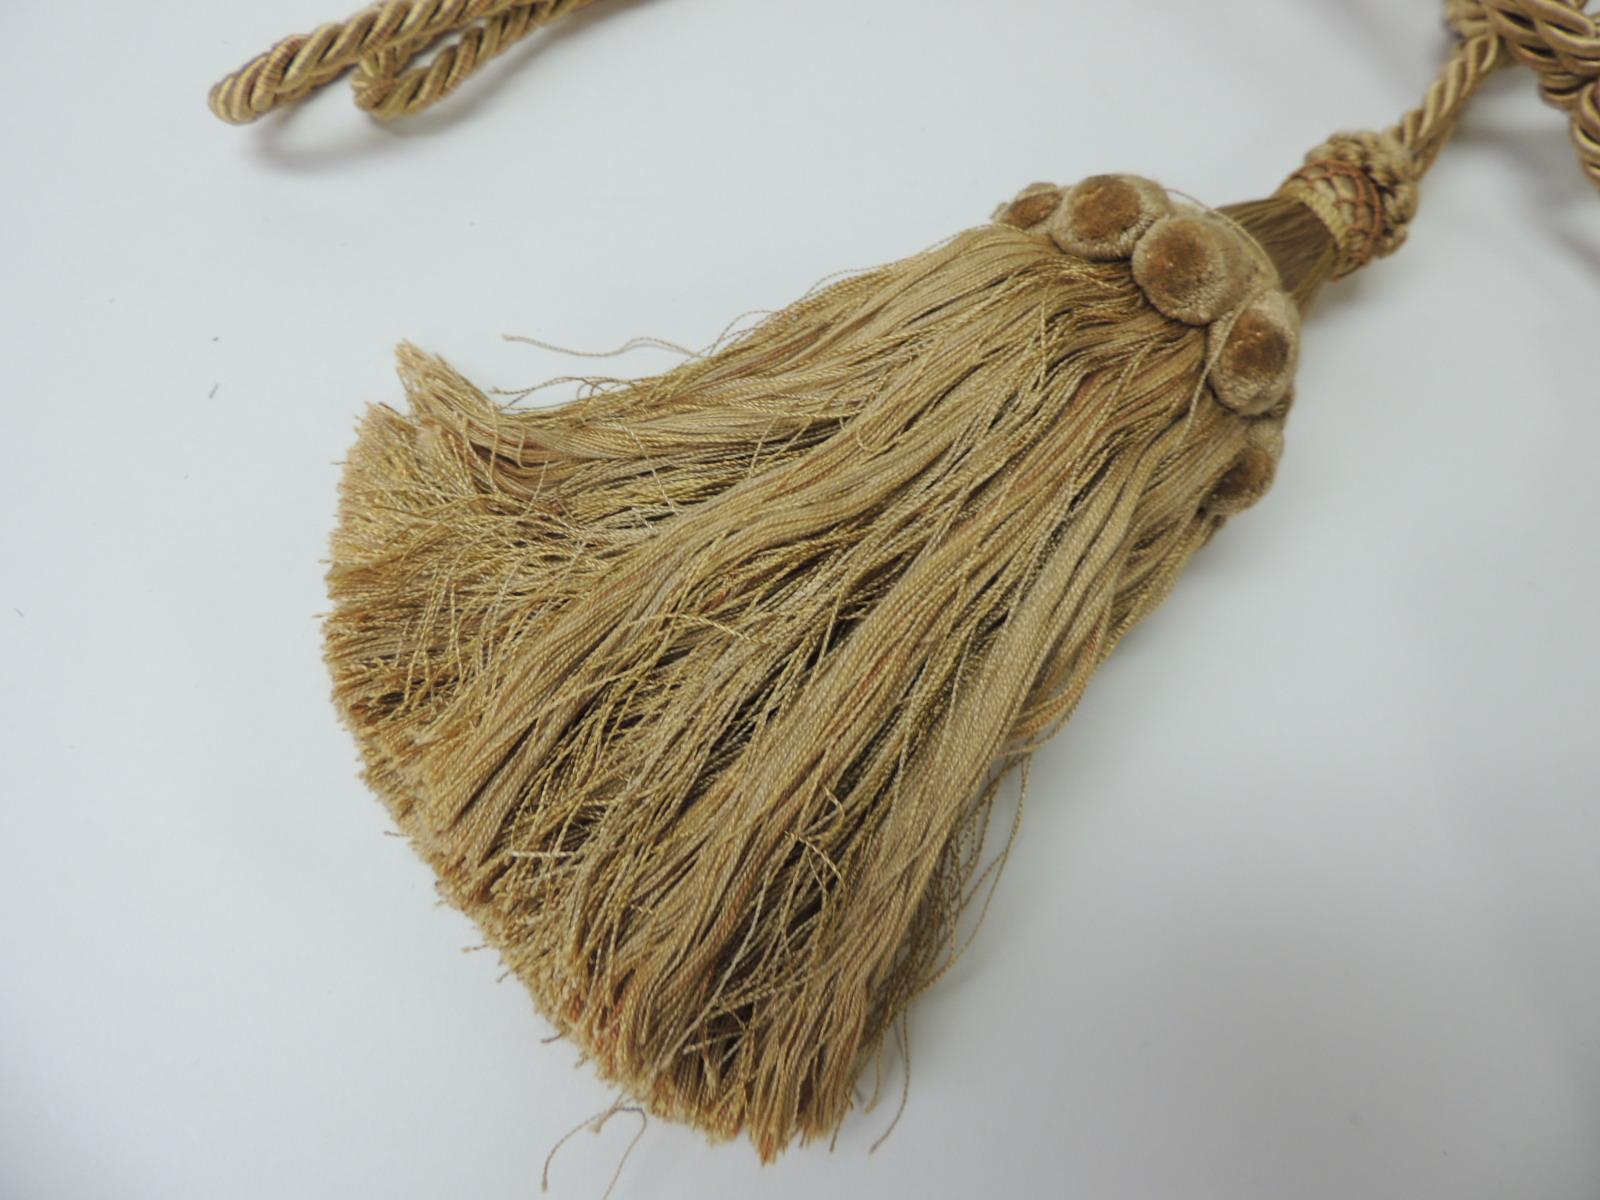 Pair of large twisted silk rope gold tassels.
Size: 28